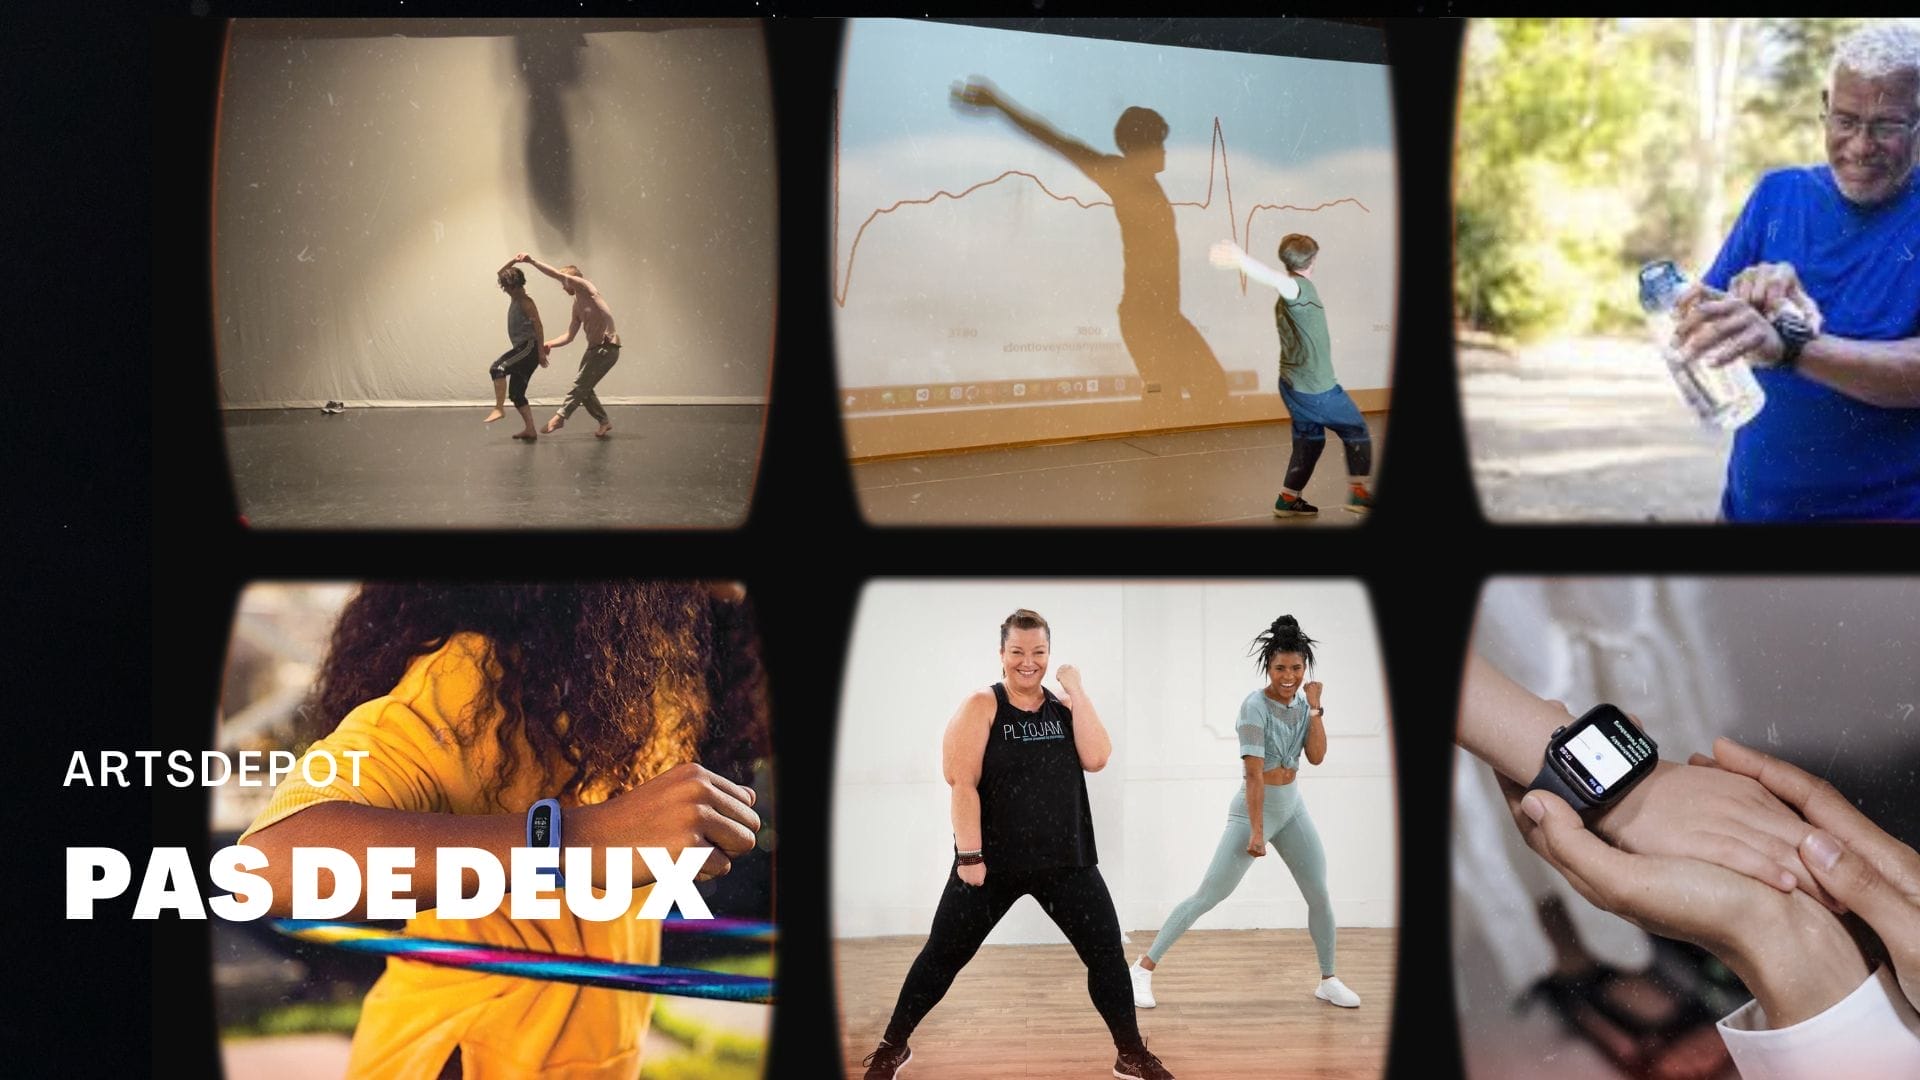 A collage of age diverse people participating in exercise and dance. On the lefthand side, bold white text reads ARTSDEPOT PAS DE DEUX.